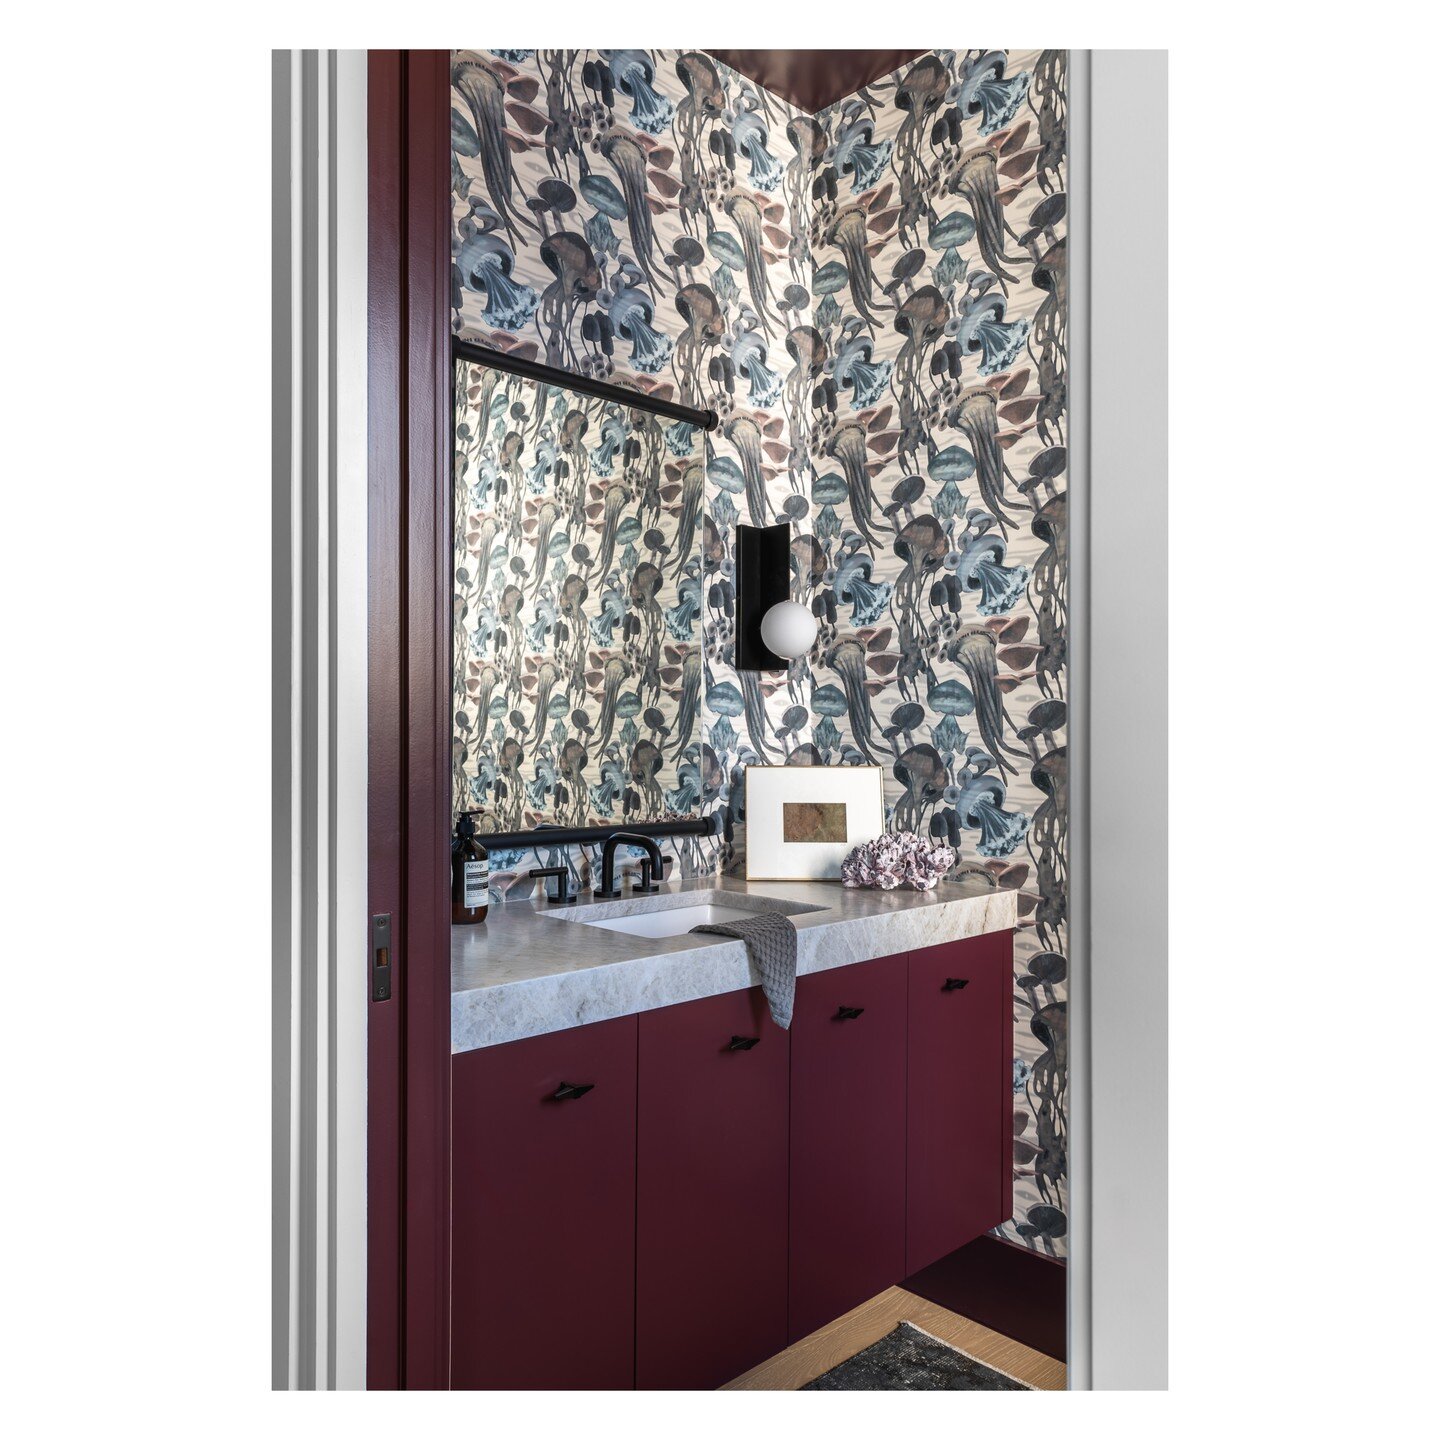 Jellyfish &amp; mushrooms! How fun is this powder room from @camerongetterdesign ! This is what happens when a great designer gets to design her own home. 💯